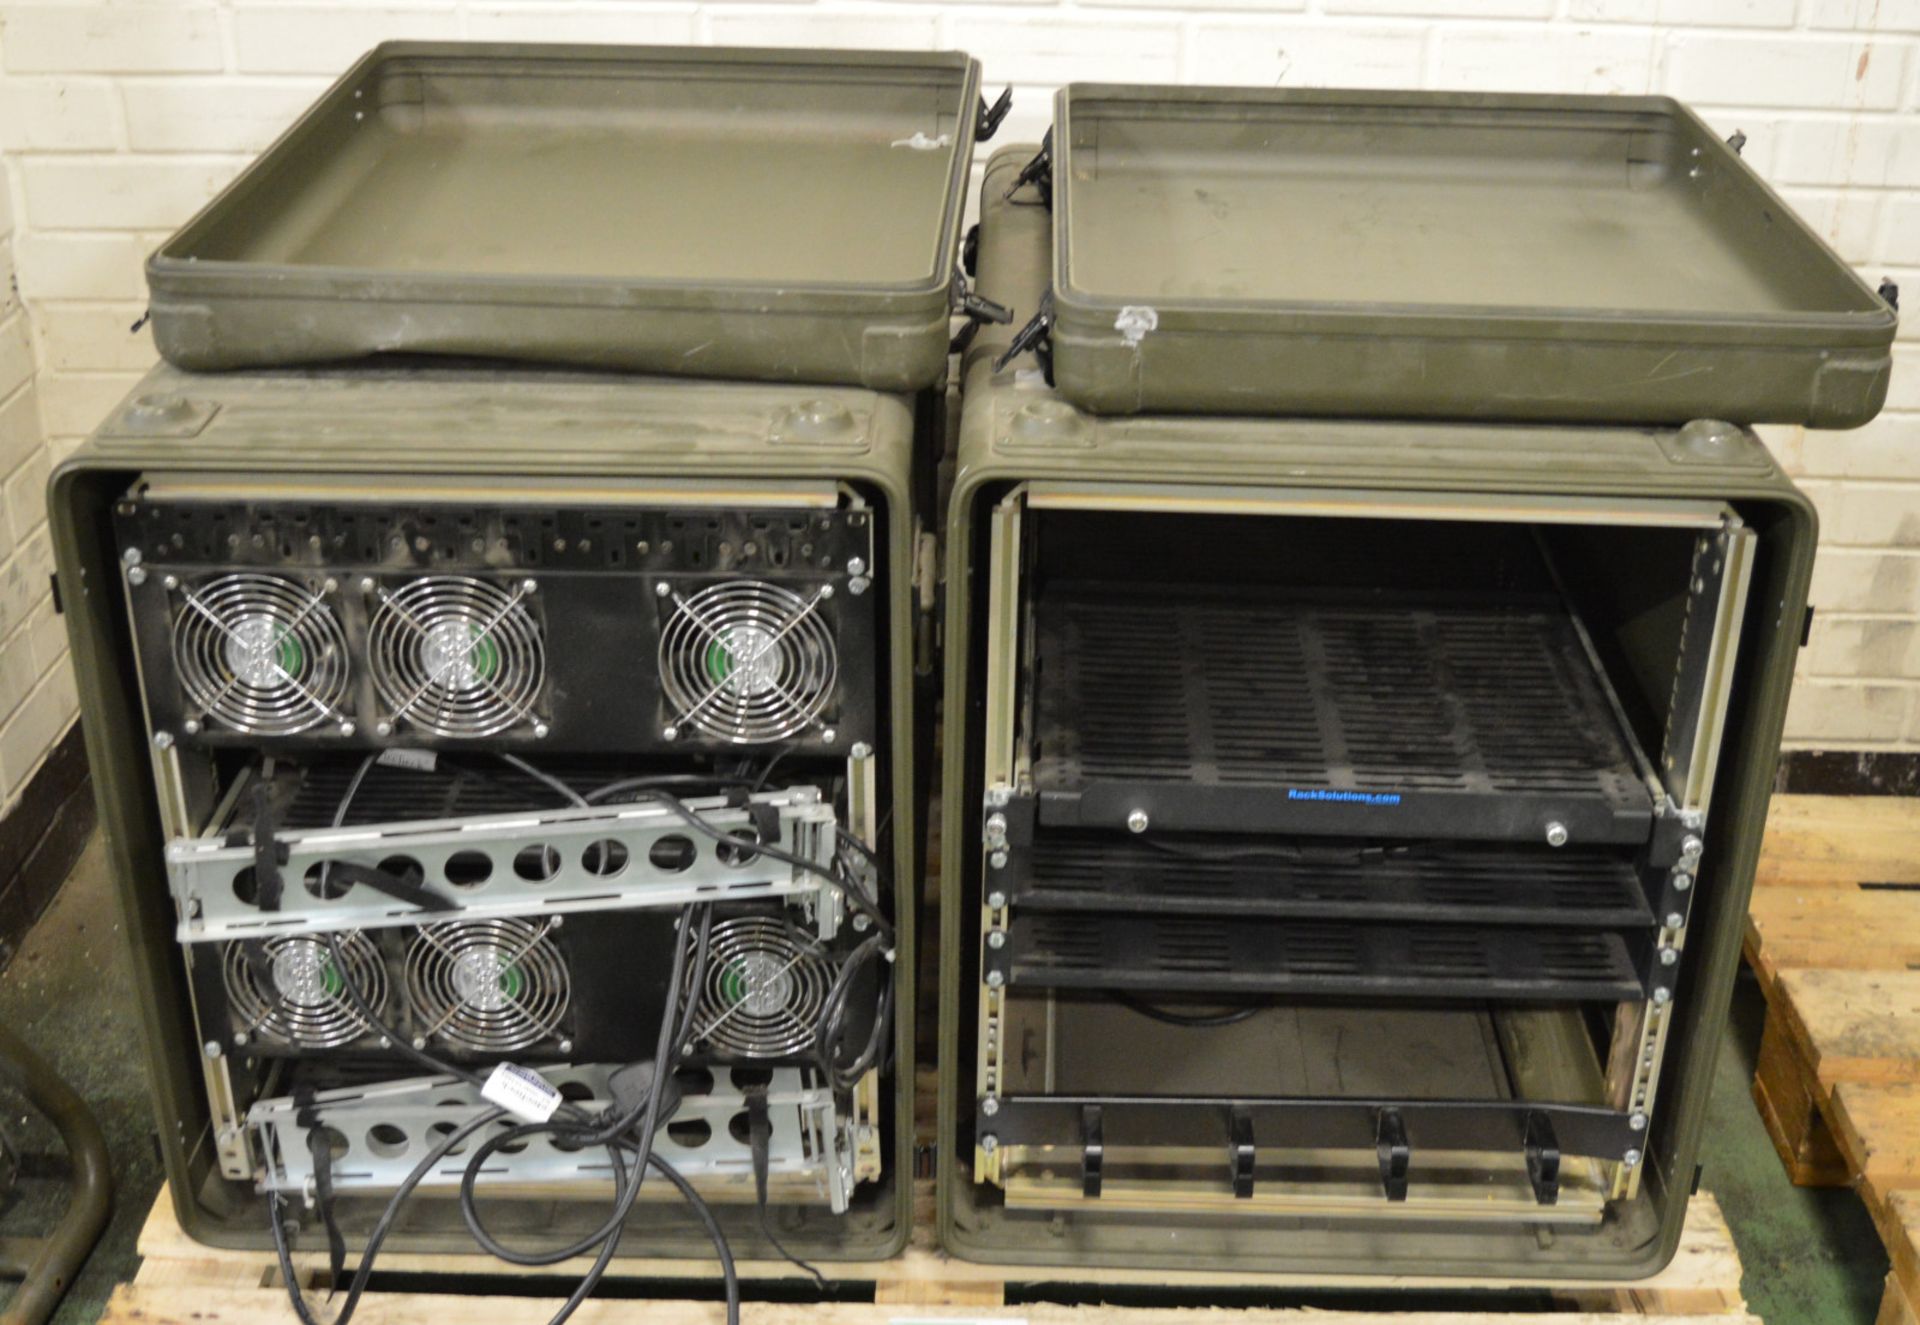 2x Portable 19" Electrical Equipment Racks in Metal Carry Cases - approx 900mm x 600mm x 5